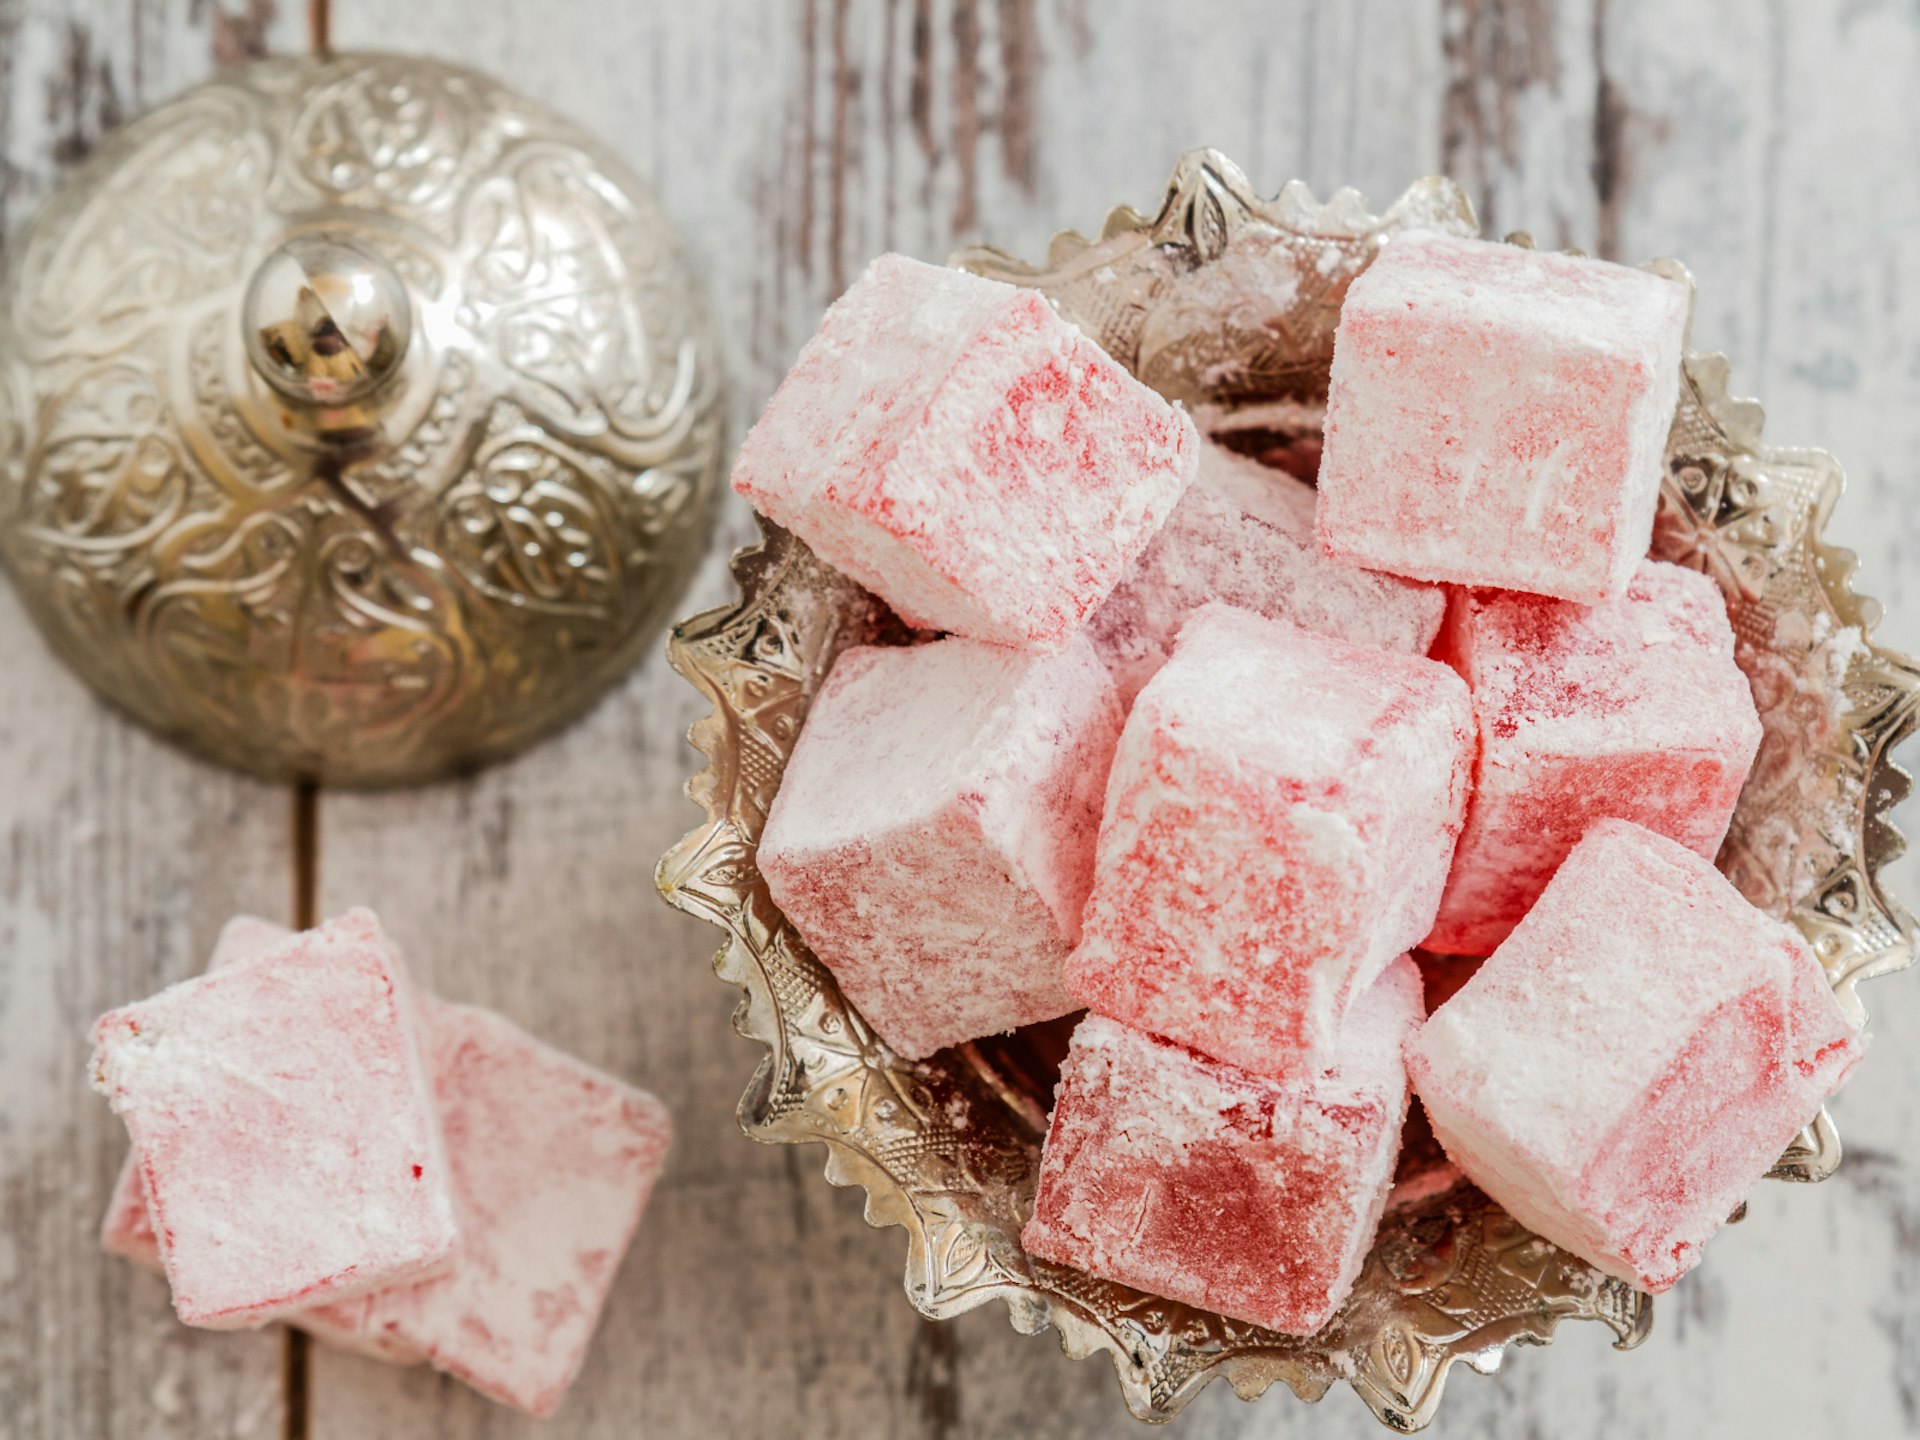 A bowl of rose-flavoured Turkish Delight © OZMedia / Shutterstock